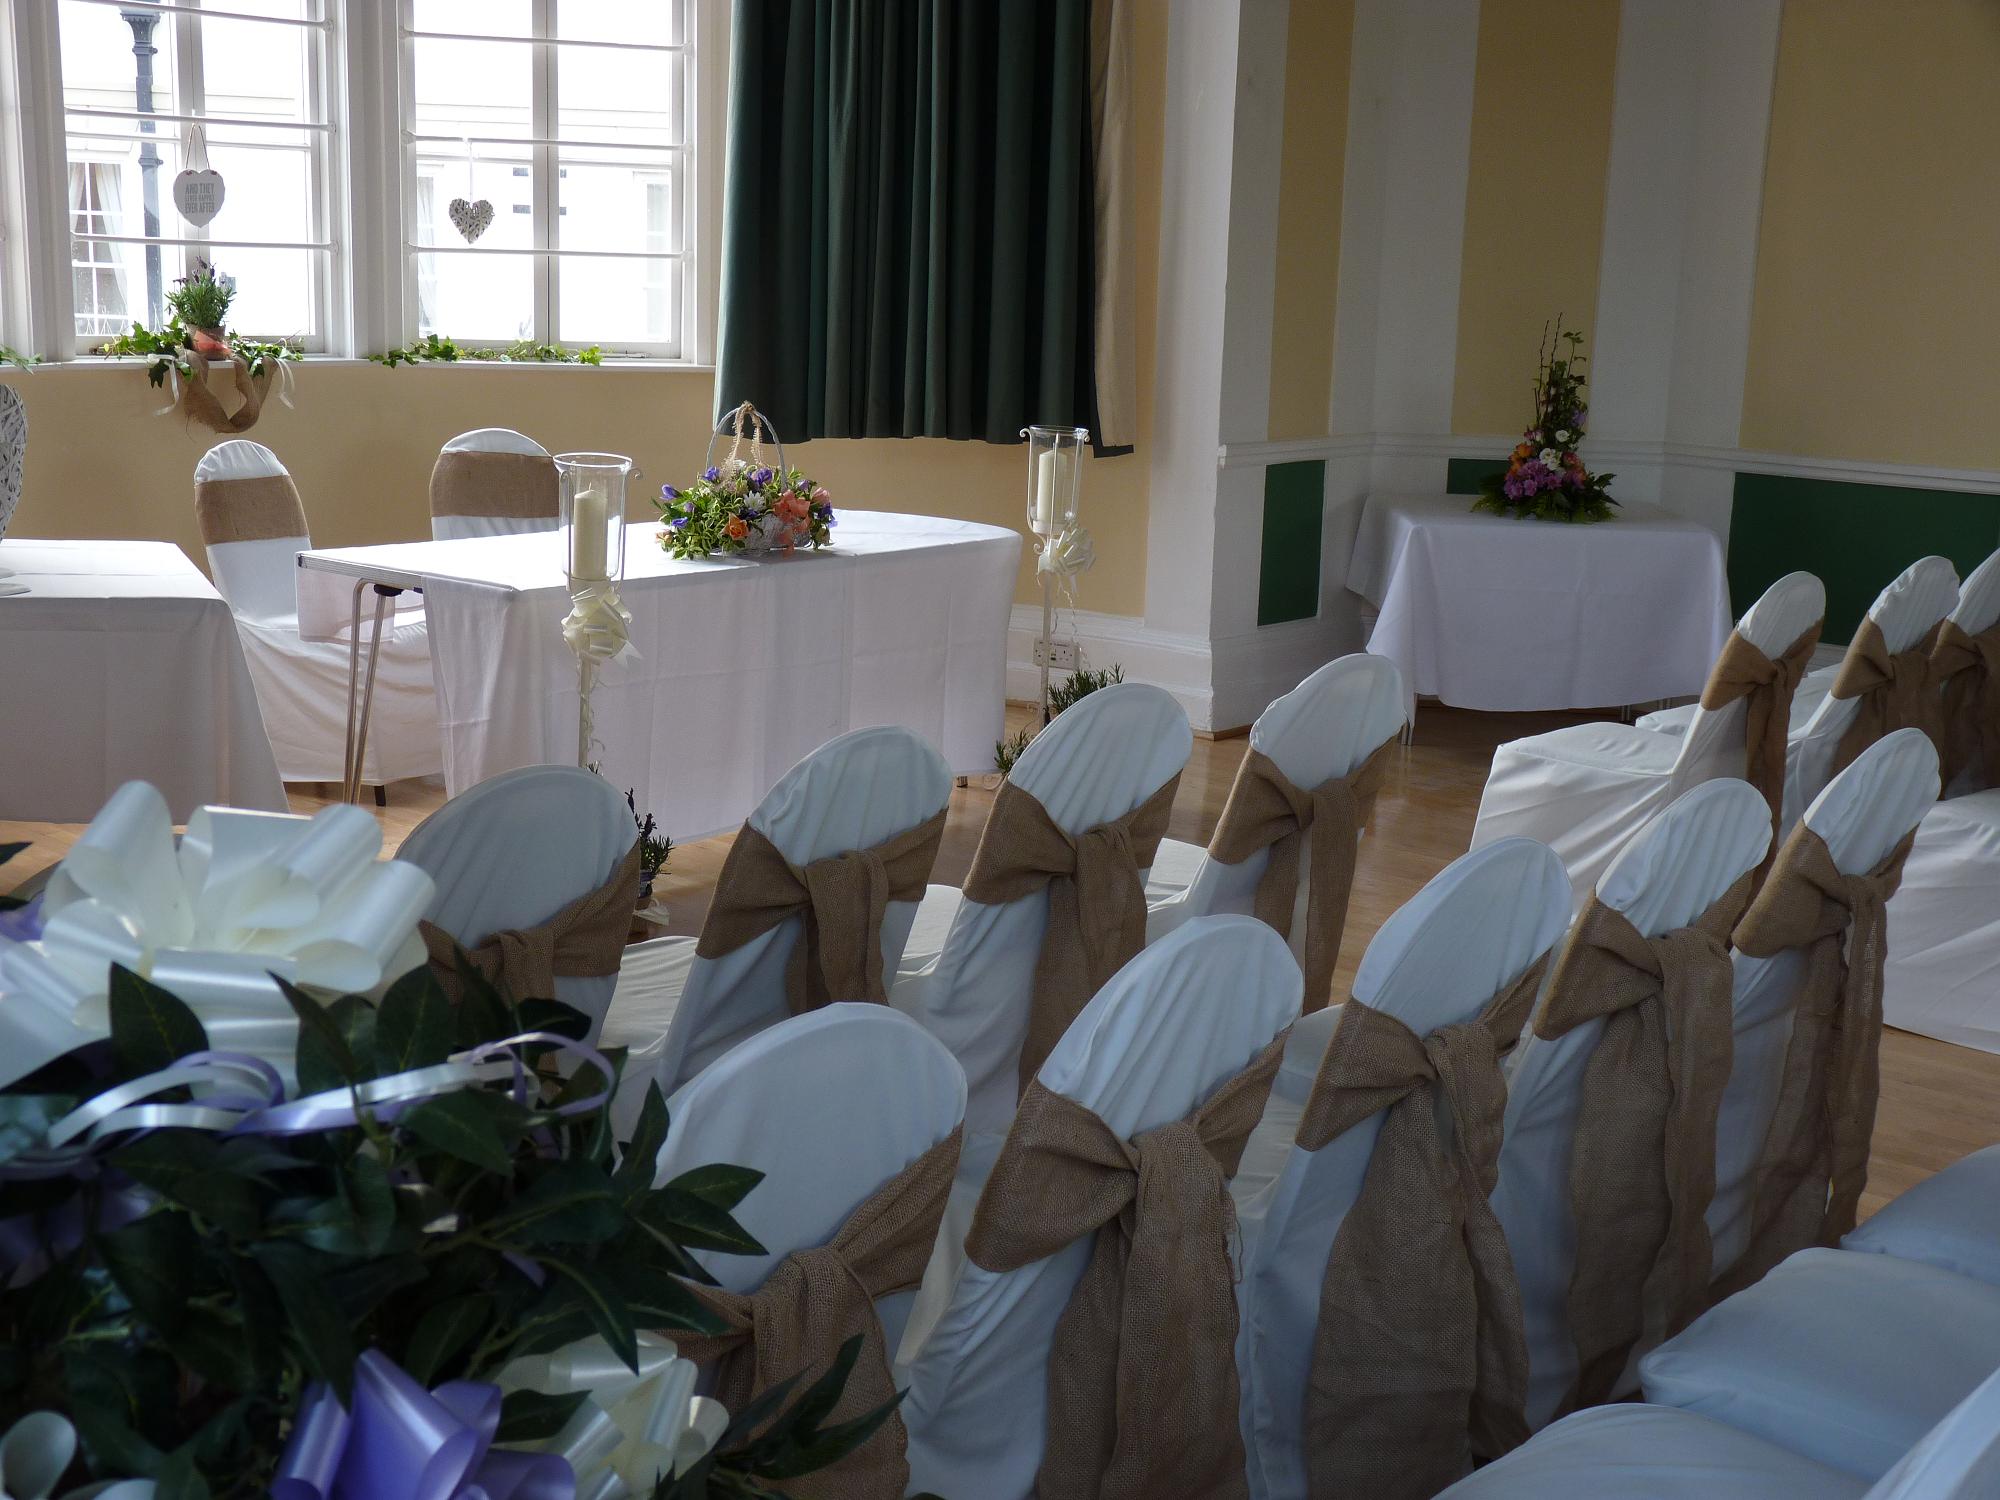 Lutterworth Town Hall wedding service with hessian bows on chairs